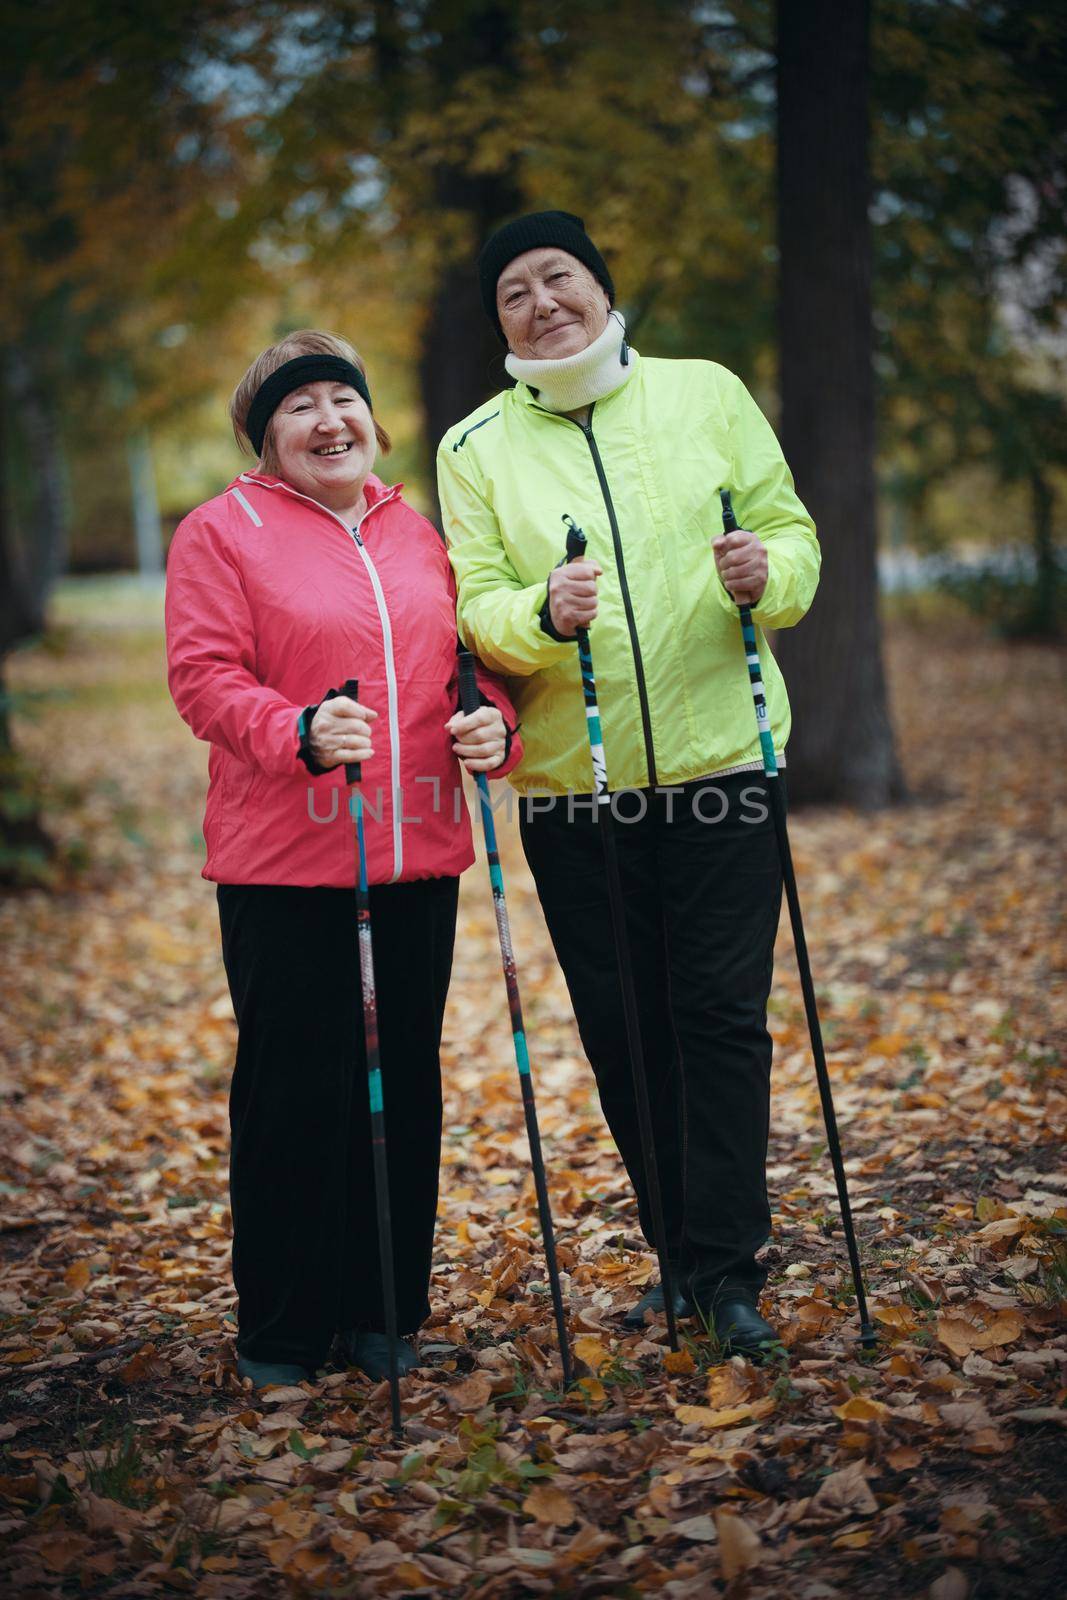 Two elderly women are standing in a park with sticks for nordic walking. Wide shot